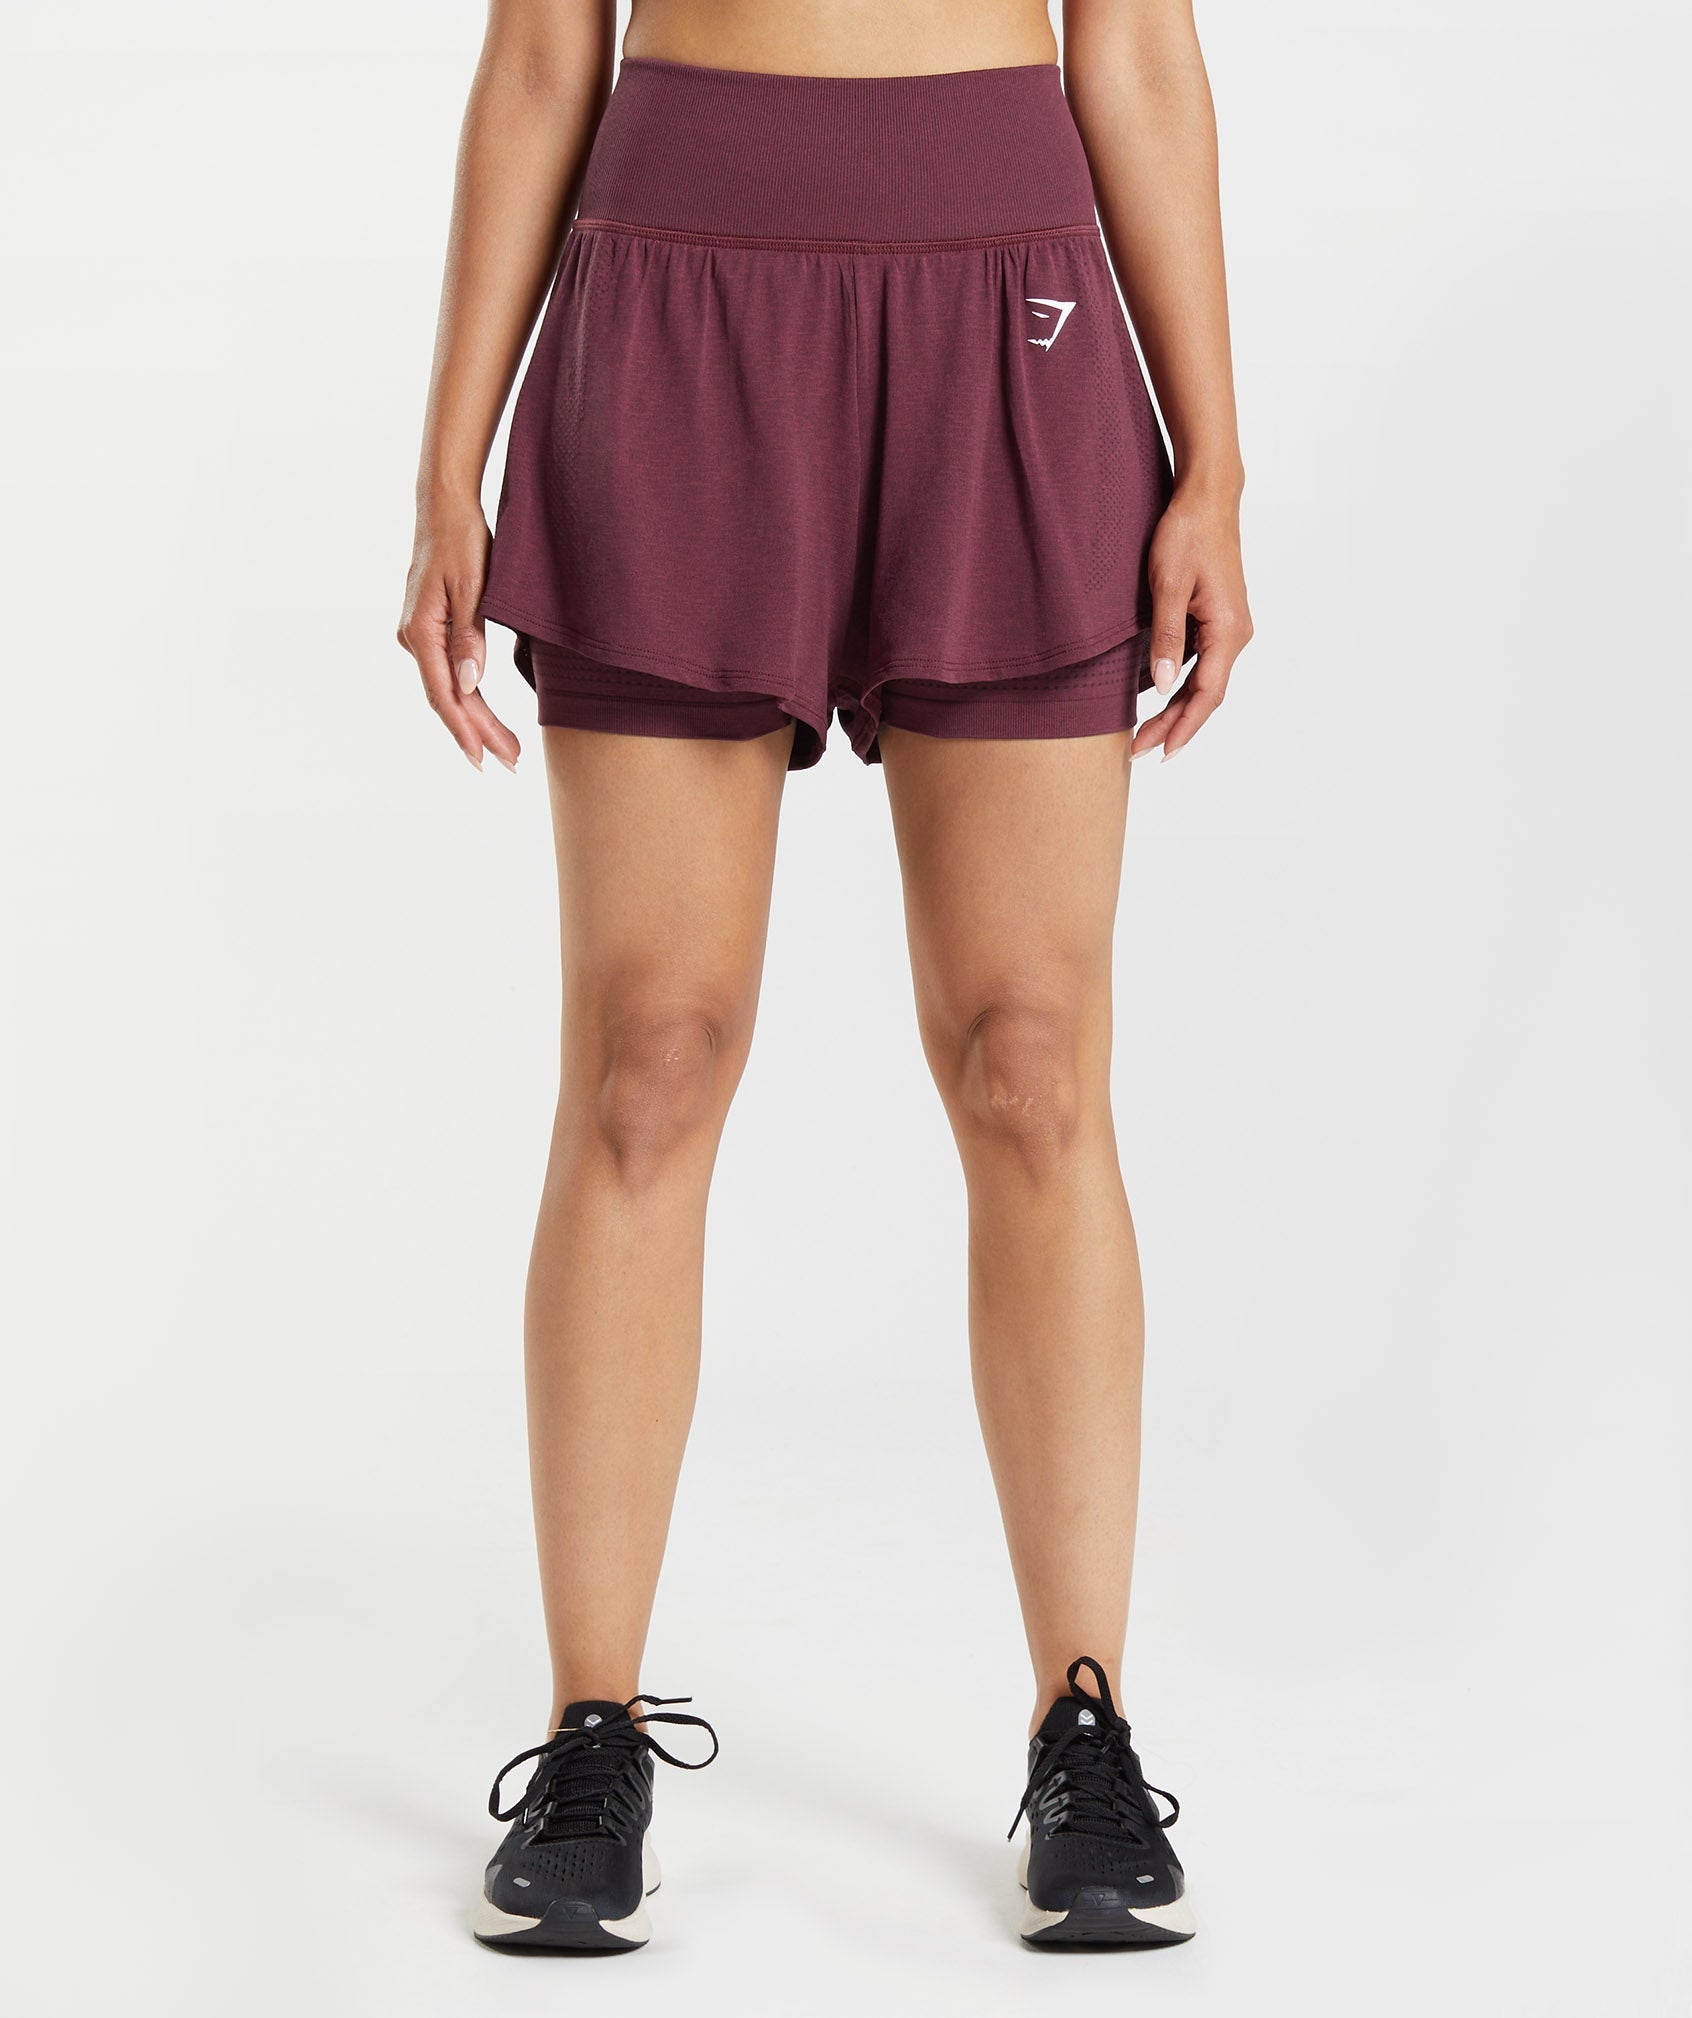 Vital Seamless 2.0 2-in-1 Shorts in Baked Maroon Marl - view 1